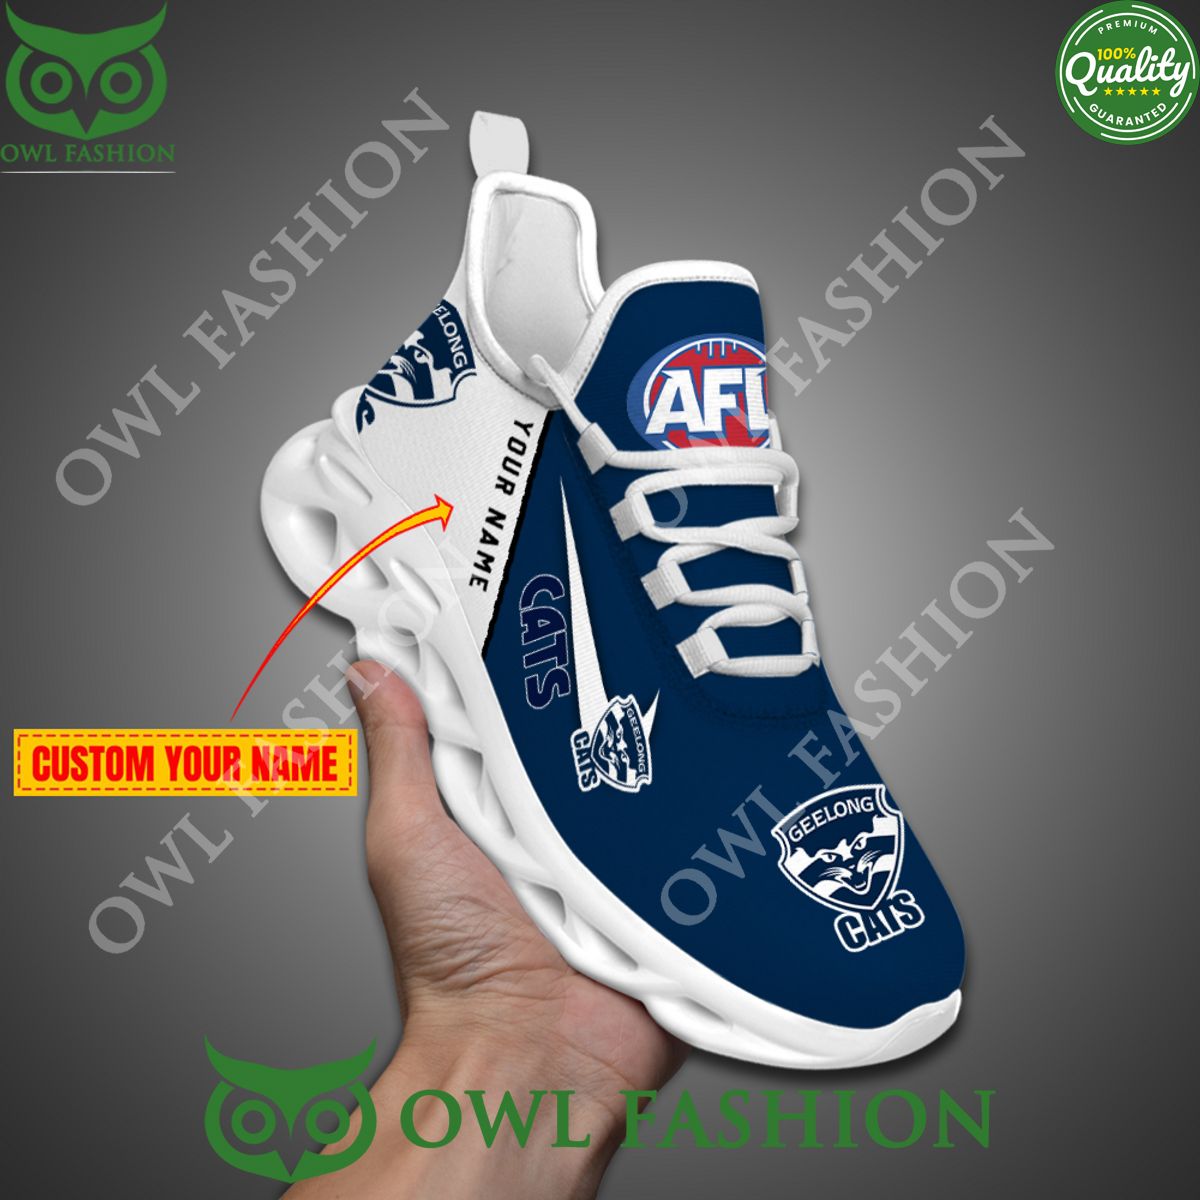 Geelong Cats AFL Personalized Max Soul Shoes This design is so eye catching.